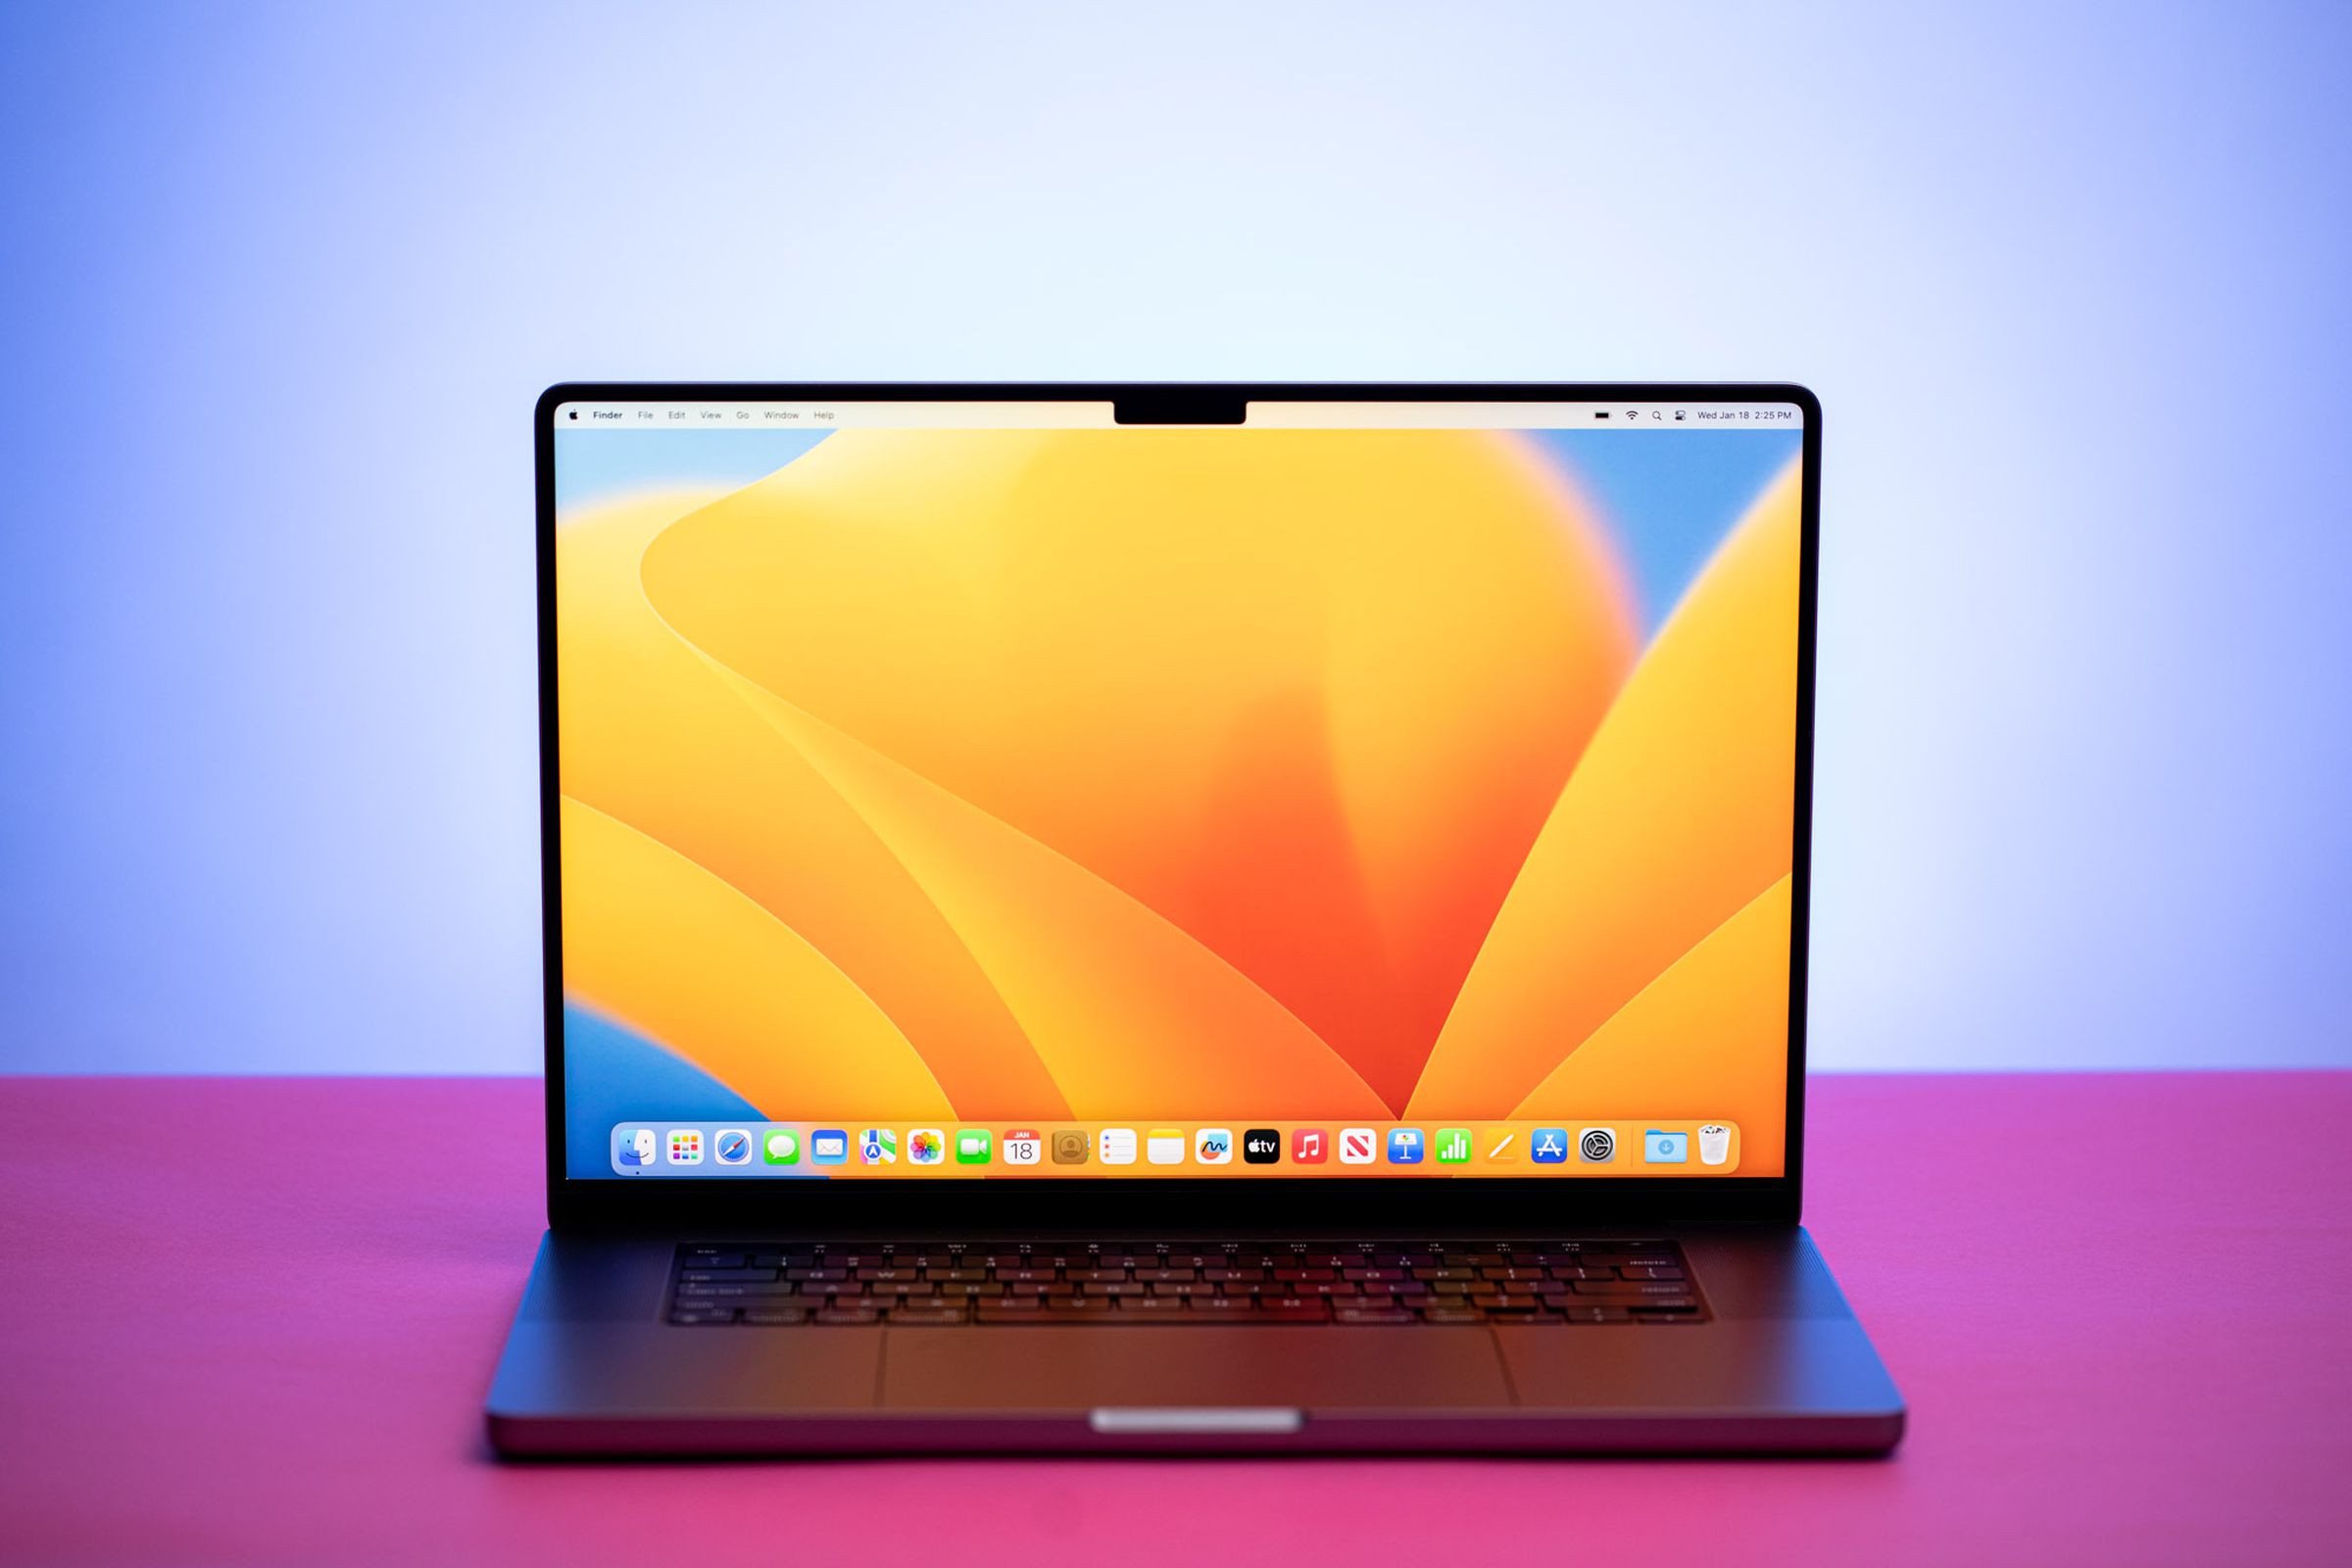 The MacBook Pro 16 (2023) on a pink table. The screen displays a blue and yellow desktop pattern.